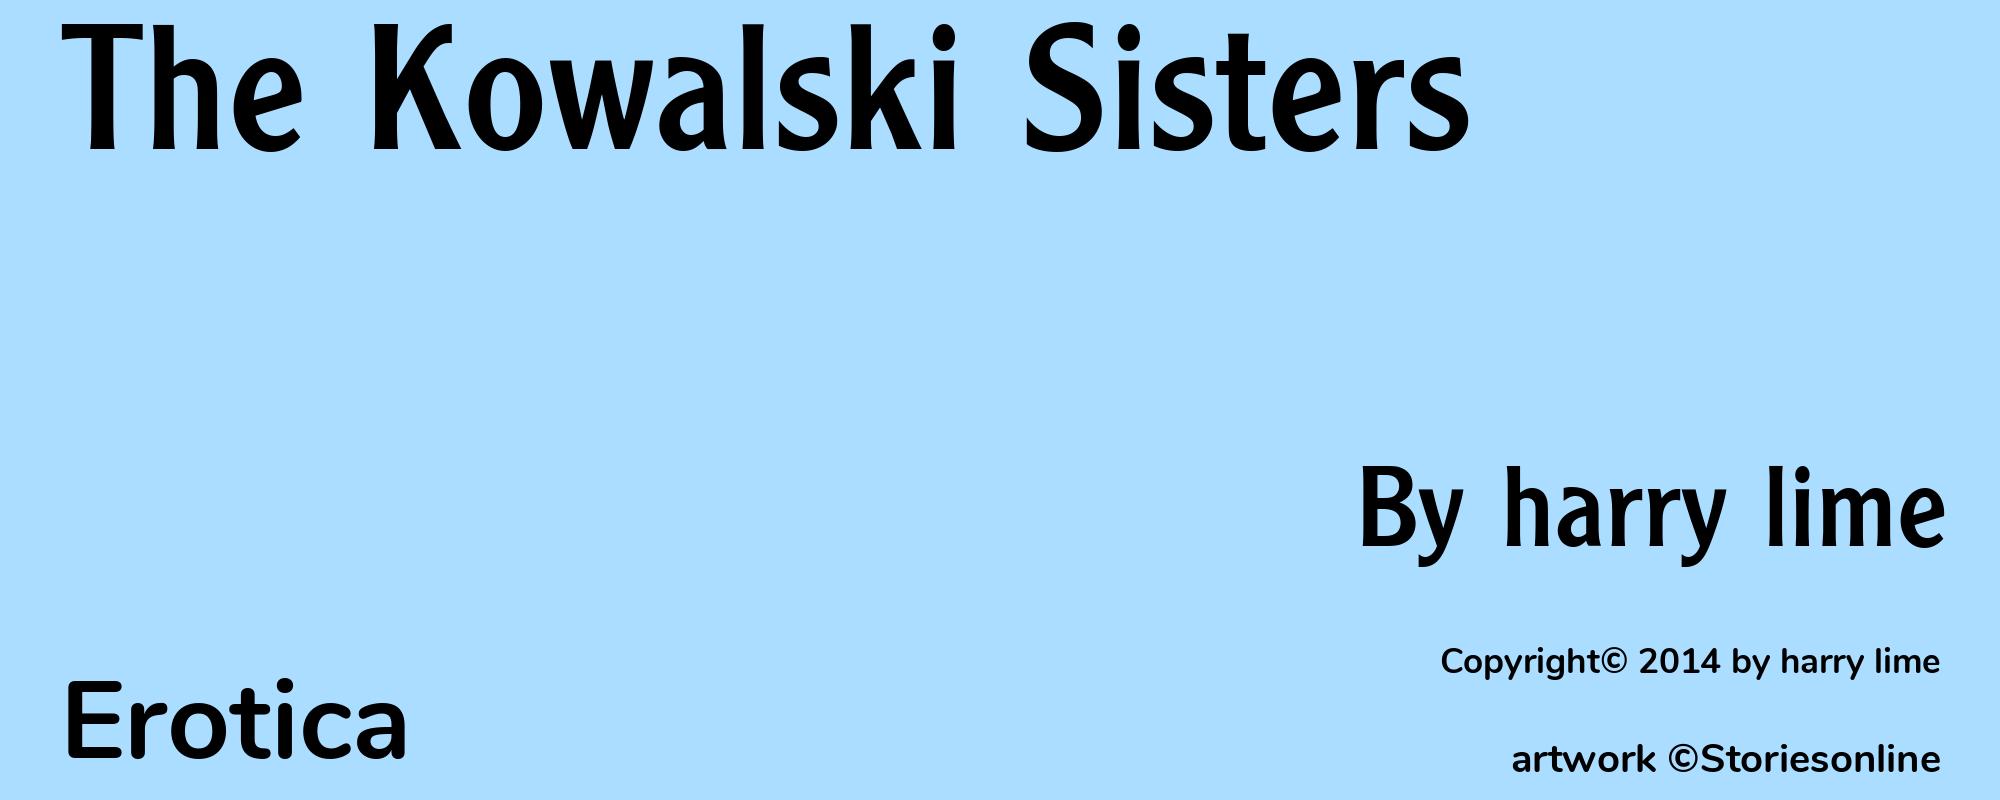 The Kowalski Sisters - Cover